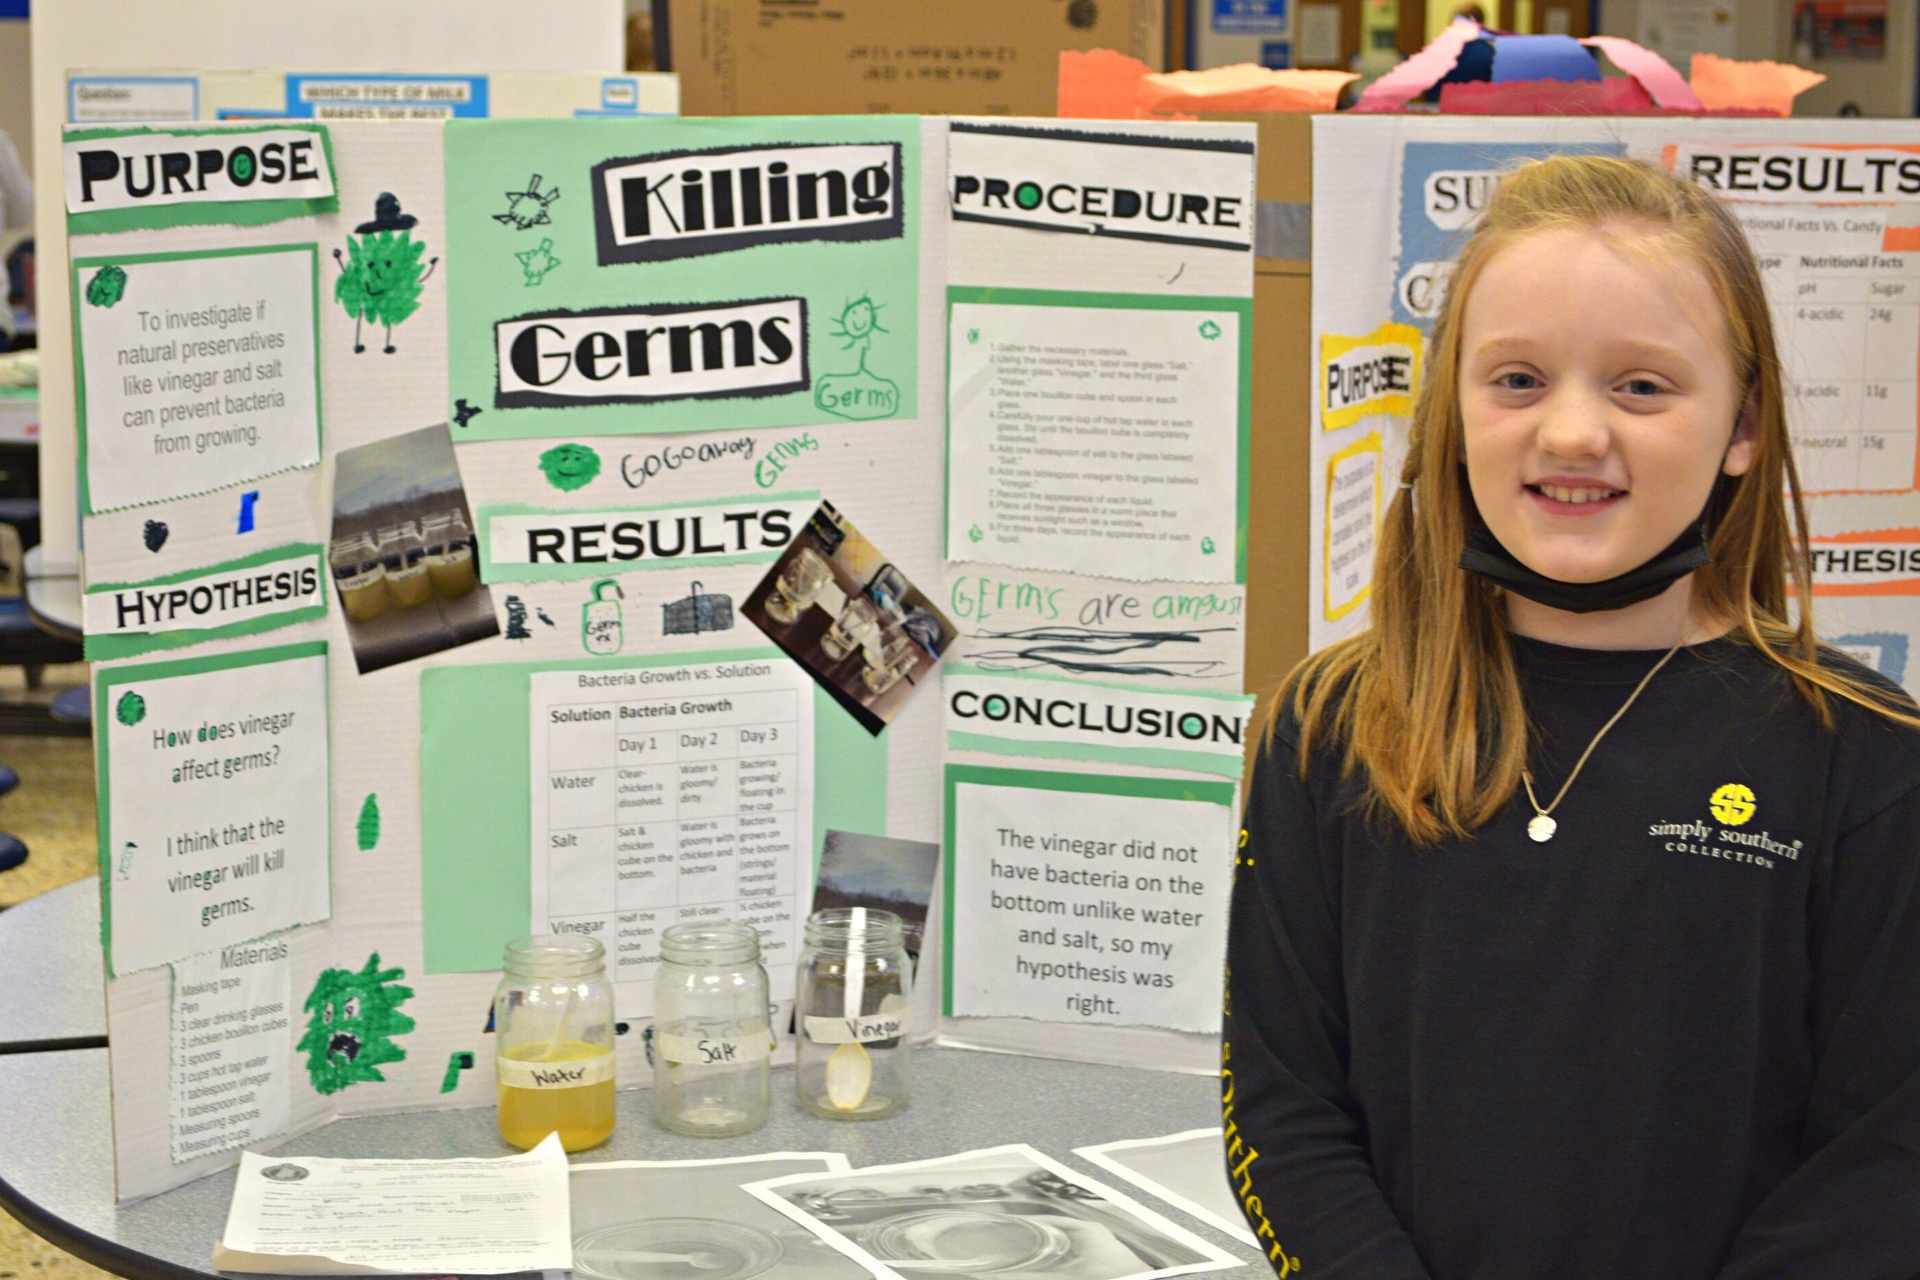 Paisley Holley, who attends Washington District Elementary School, where she is in 4th grade, completed a project about killing germs. Paisley will advance to the regional science fair as her project captured 2nd place in the chemistry category.